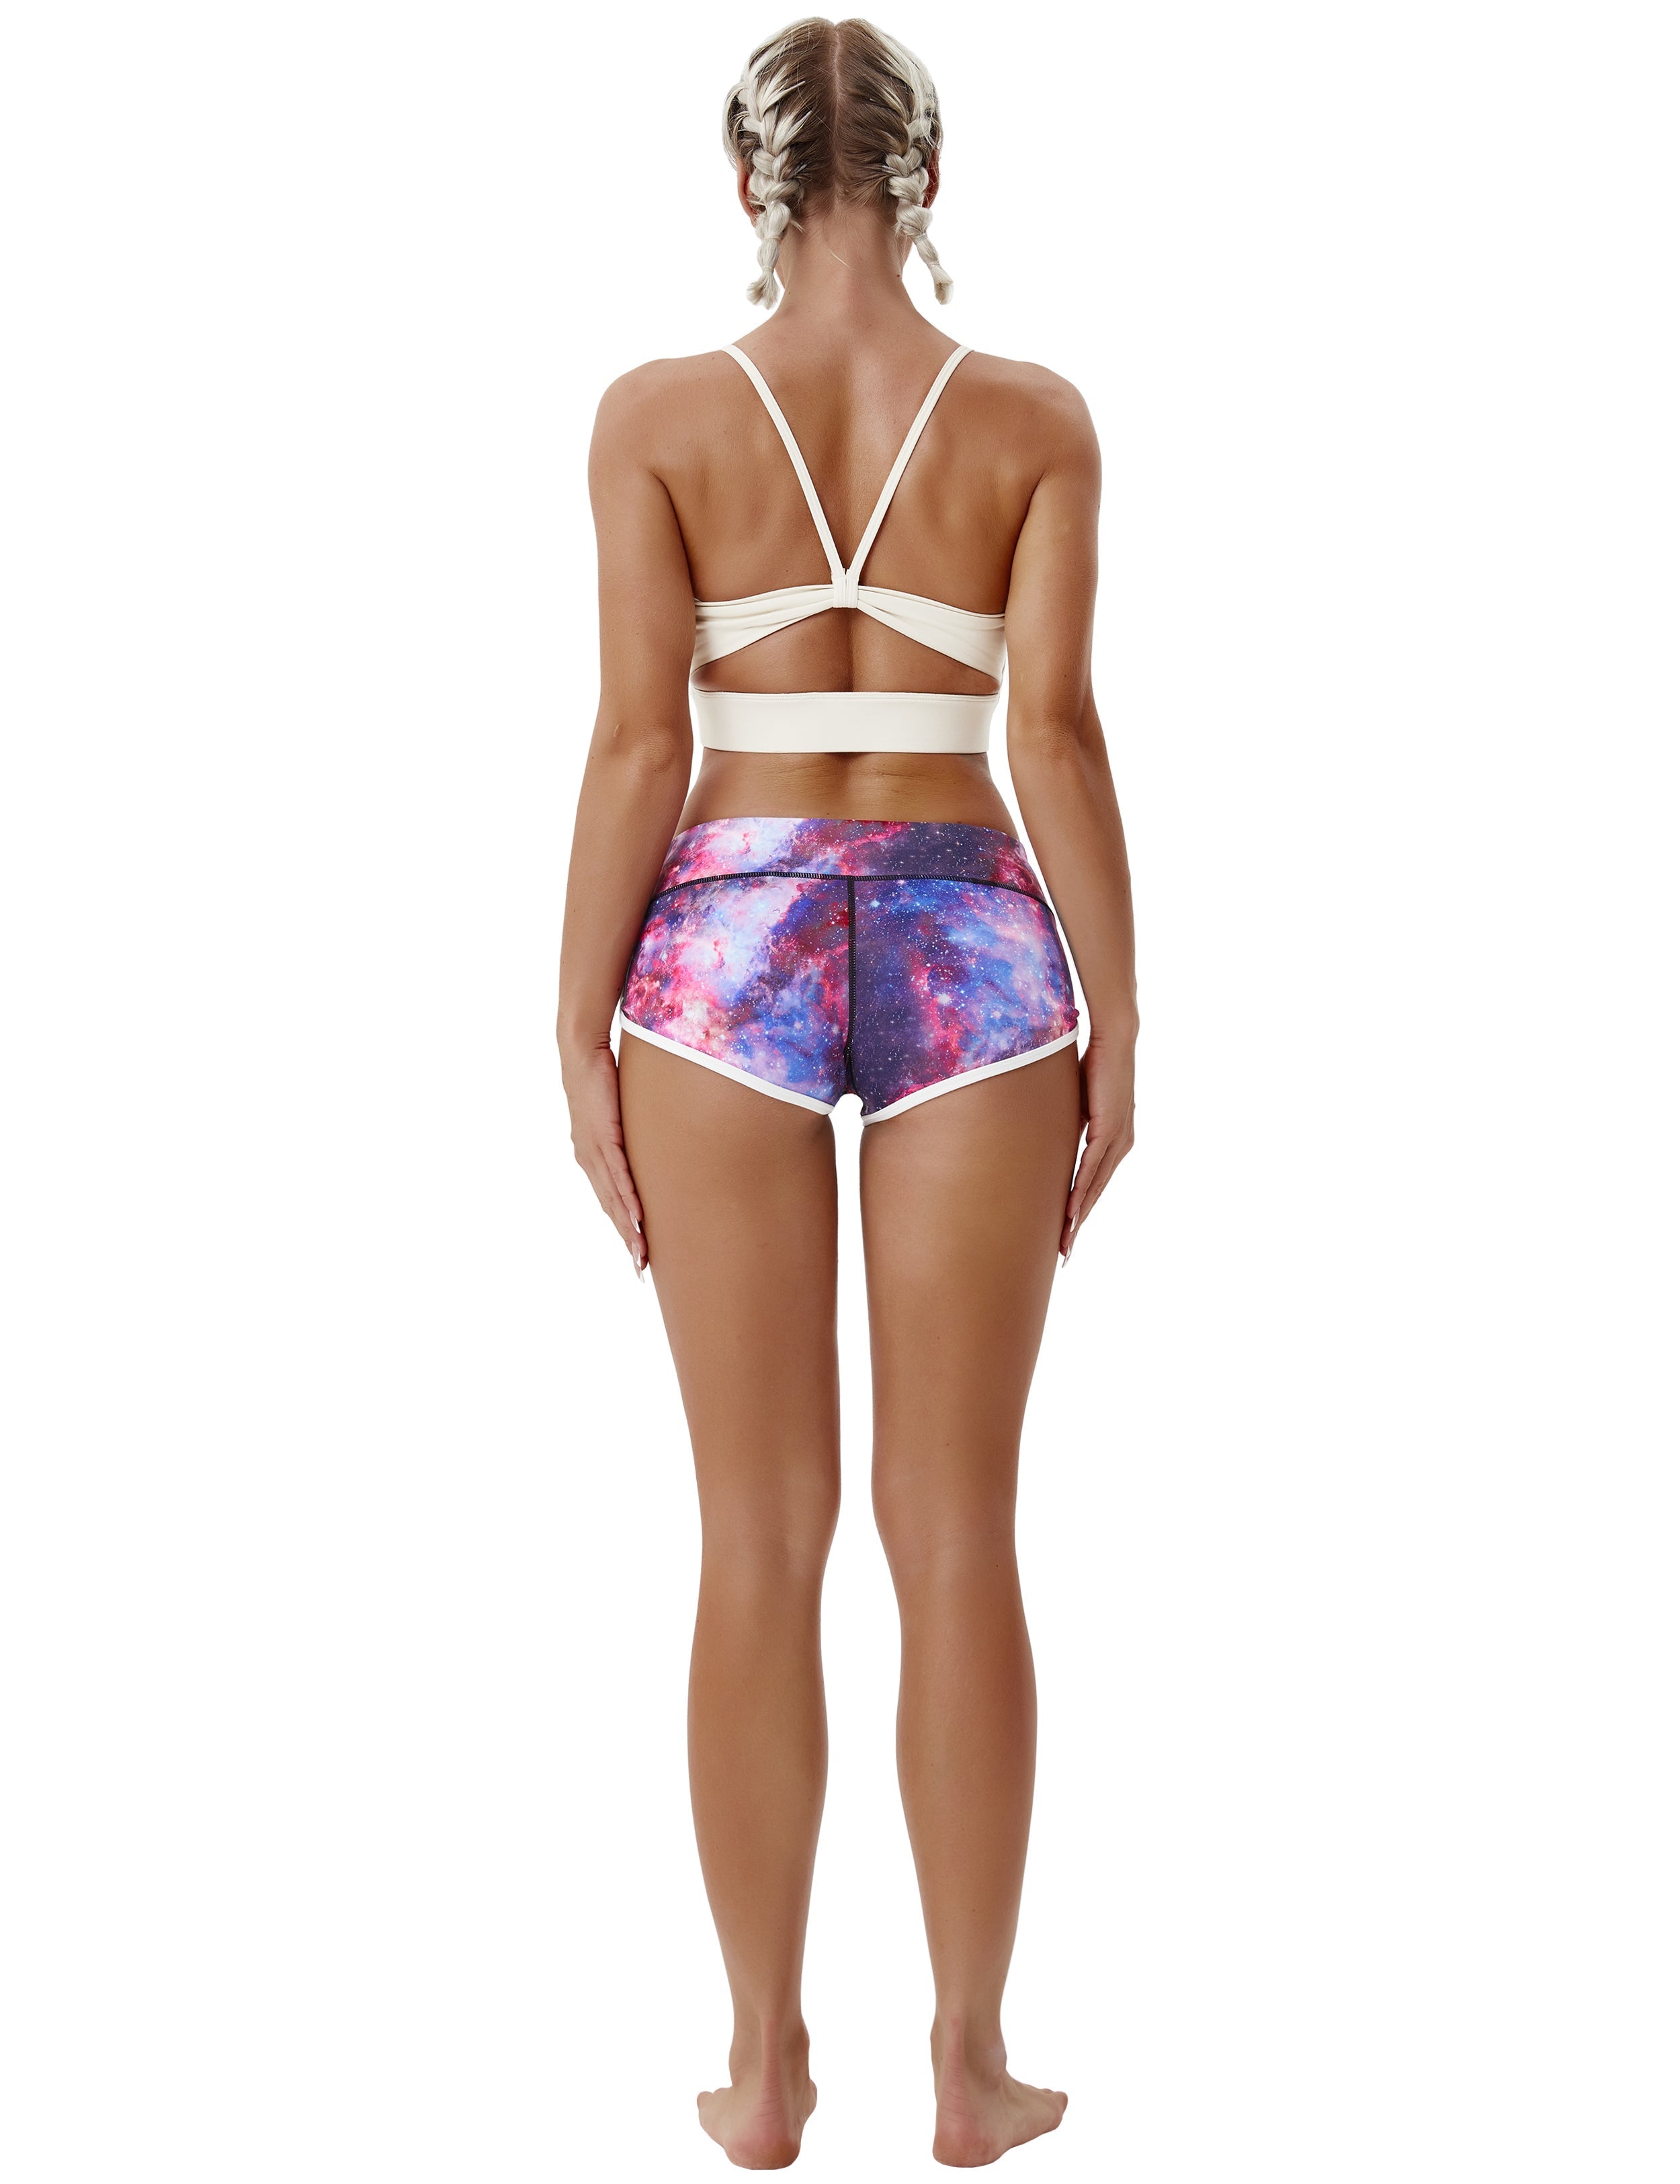 Printed Booty Tall Size Shorts galaxy Sleek, soft, smooth and totally comfortable: our newest sexy style is here. Softest-ever fabric High elasticity High density 4-way stretch Fabric doesn't attract lint easily No see-through Moisture-wicking Machine wash 78% Polyester, 22% Spandex